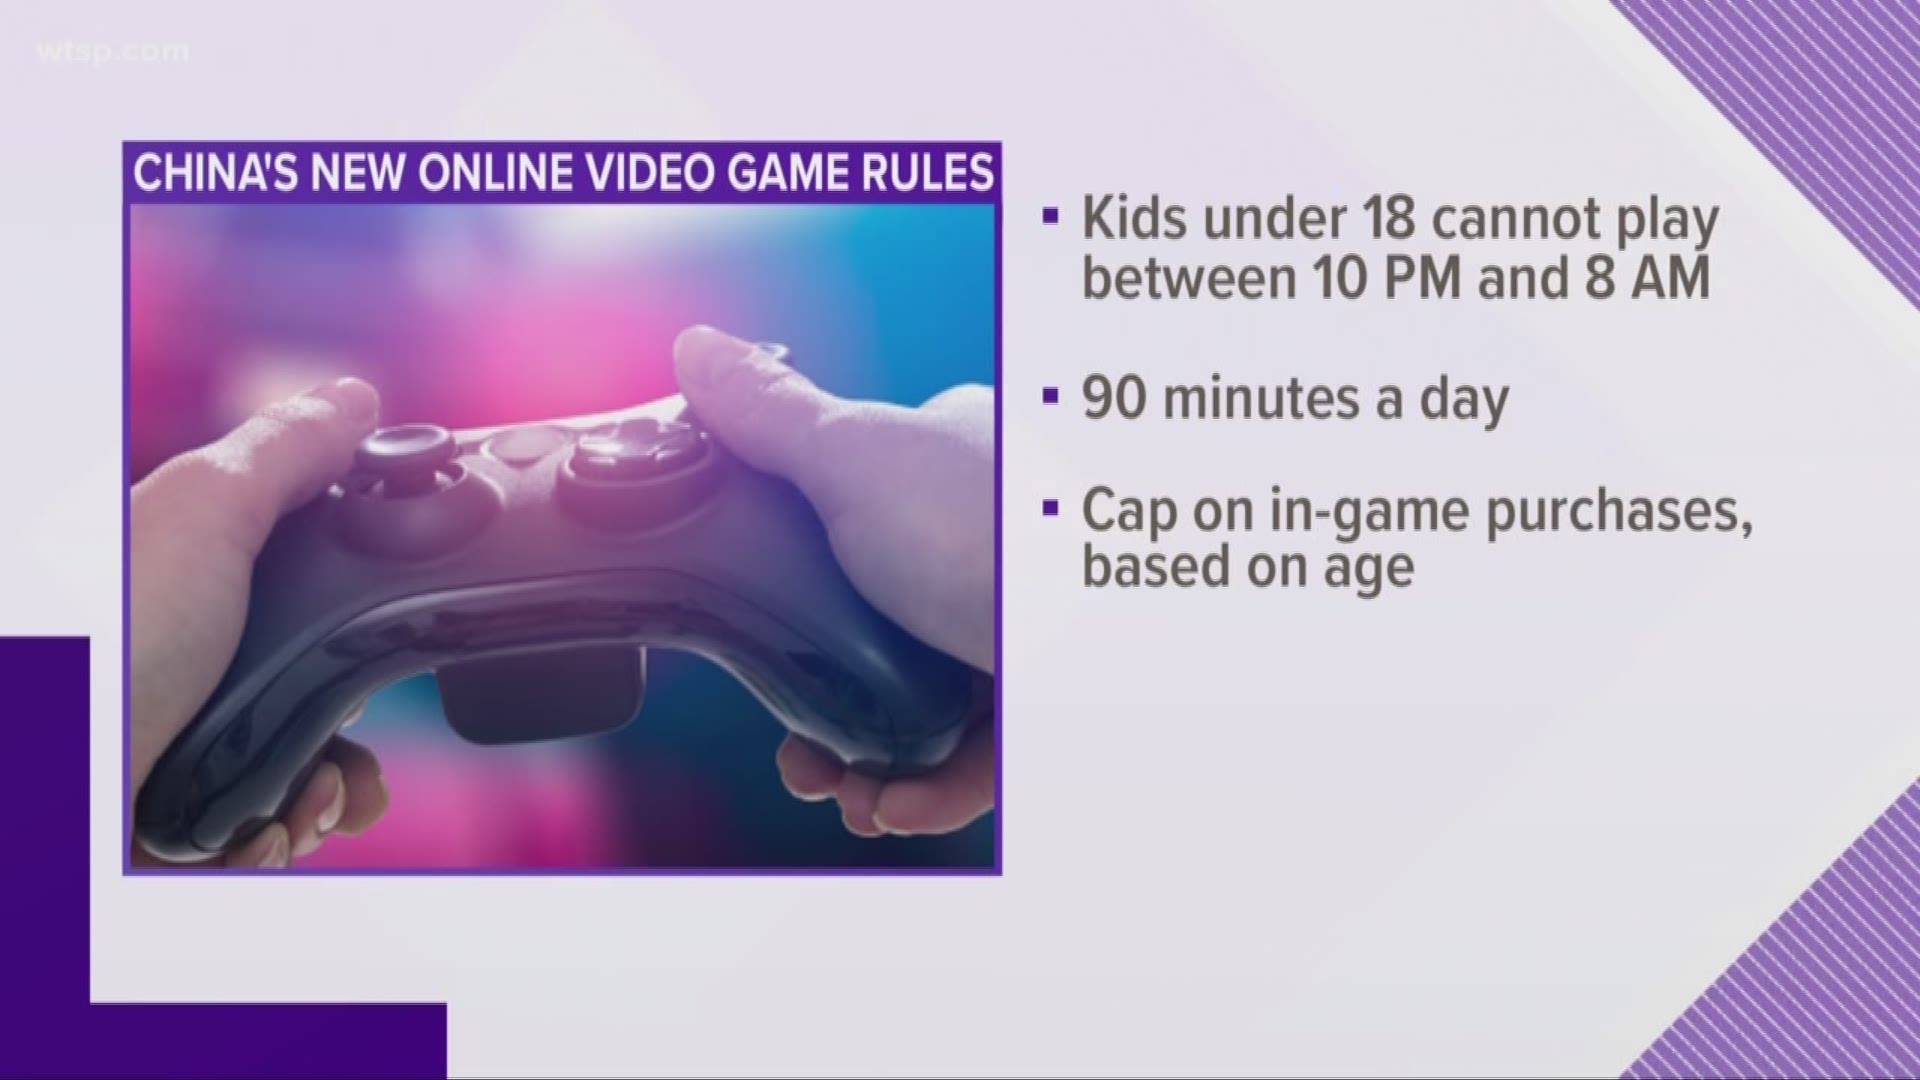 Children under 18 years old can't play after 10 p.m. and are limited to 90 minutes on weekdays.